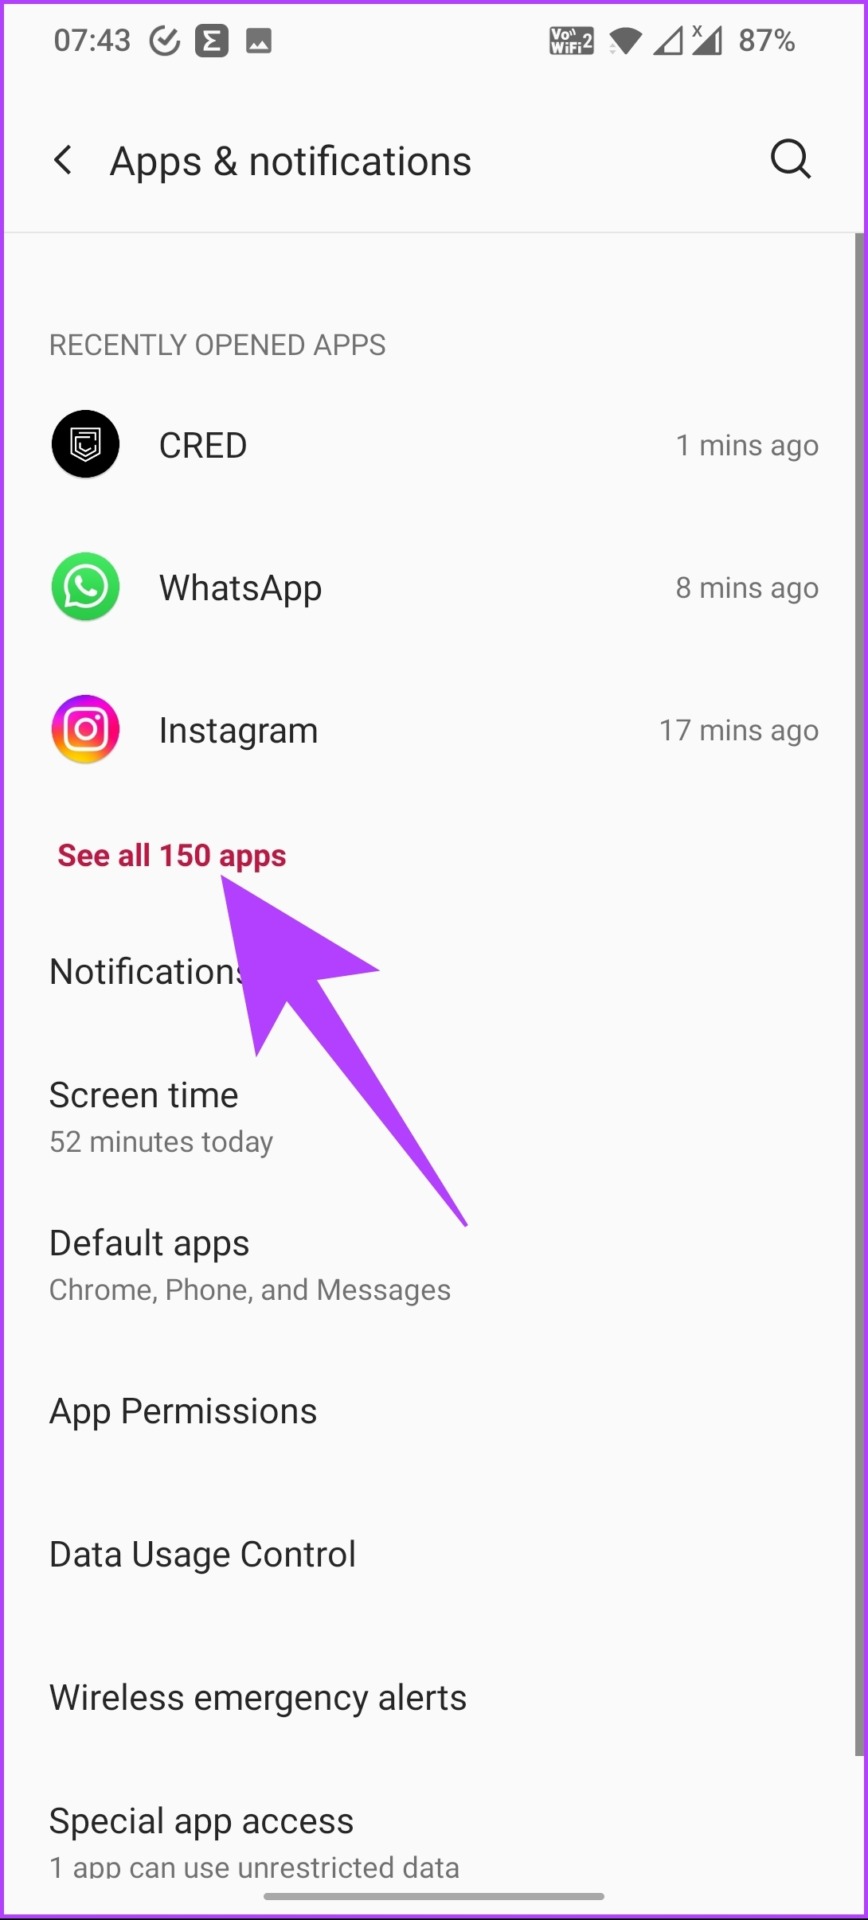 click on the 'See All Apps' option